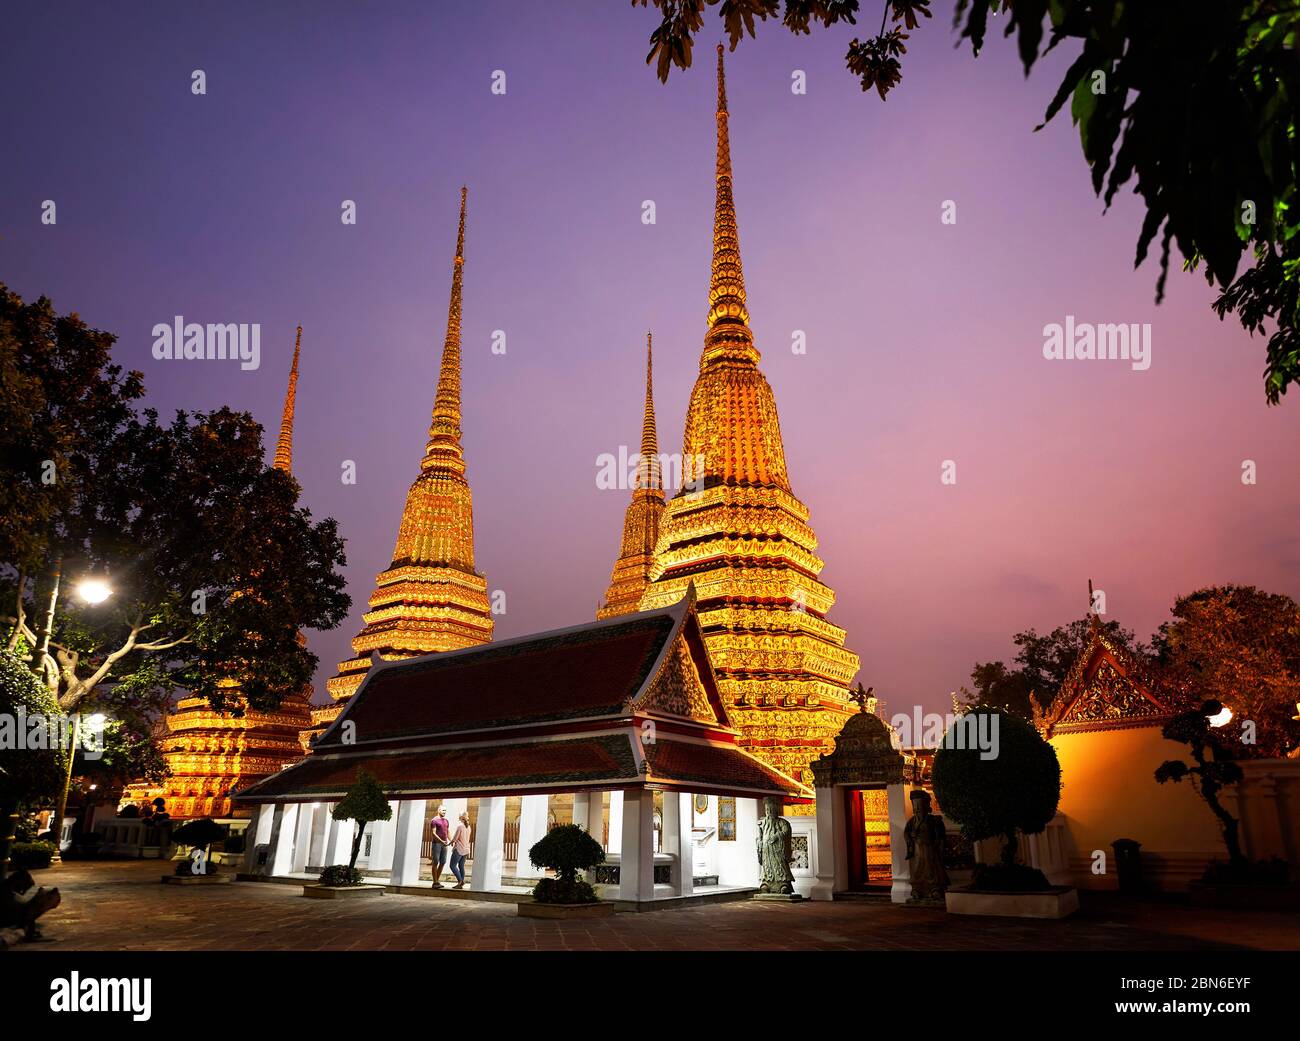 Tourist couple in the temple near golden Chedi of Wat Pho Temple in Bangkok at sunset sky, Thailand Stock Photo